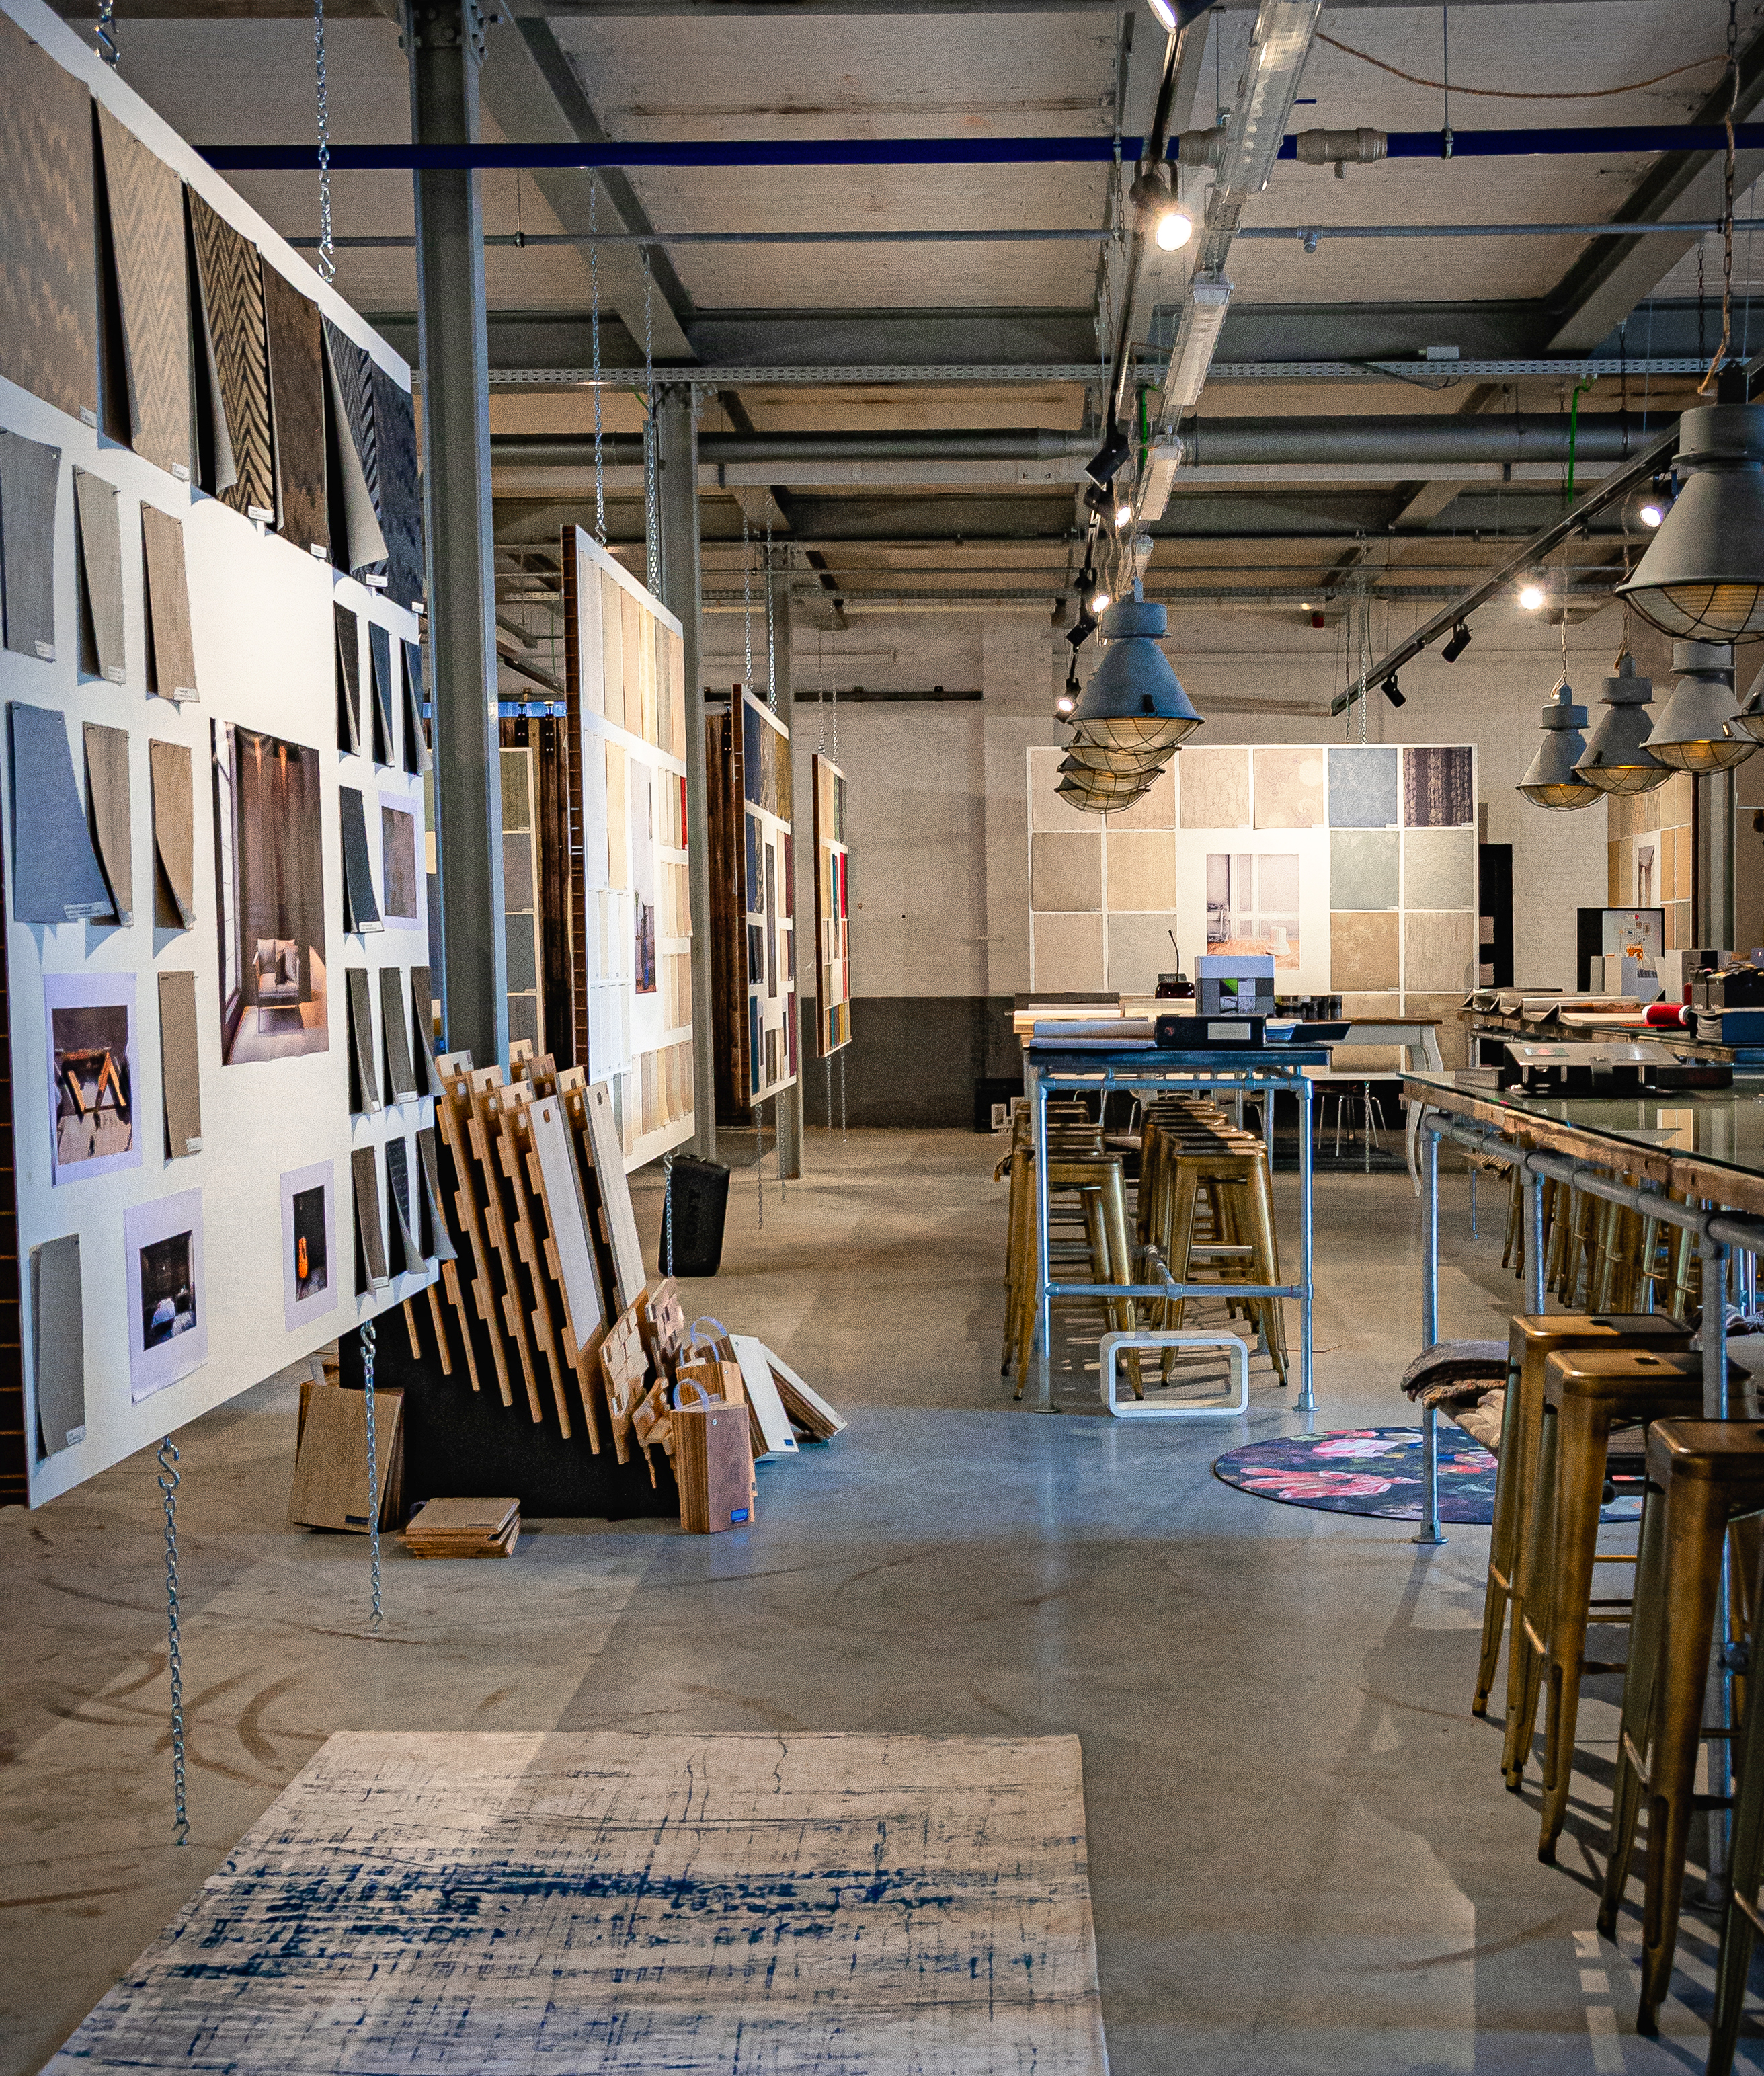 A factory and concept store based in the oldest weaving mill in Belgium.